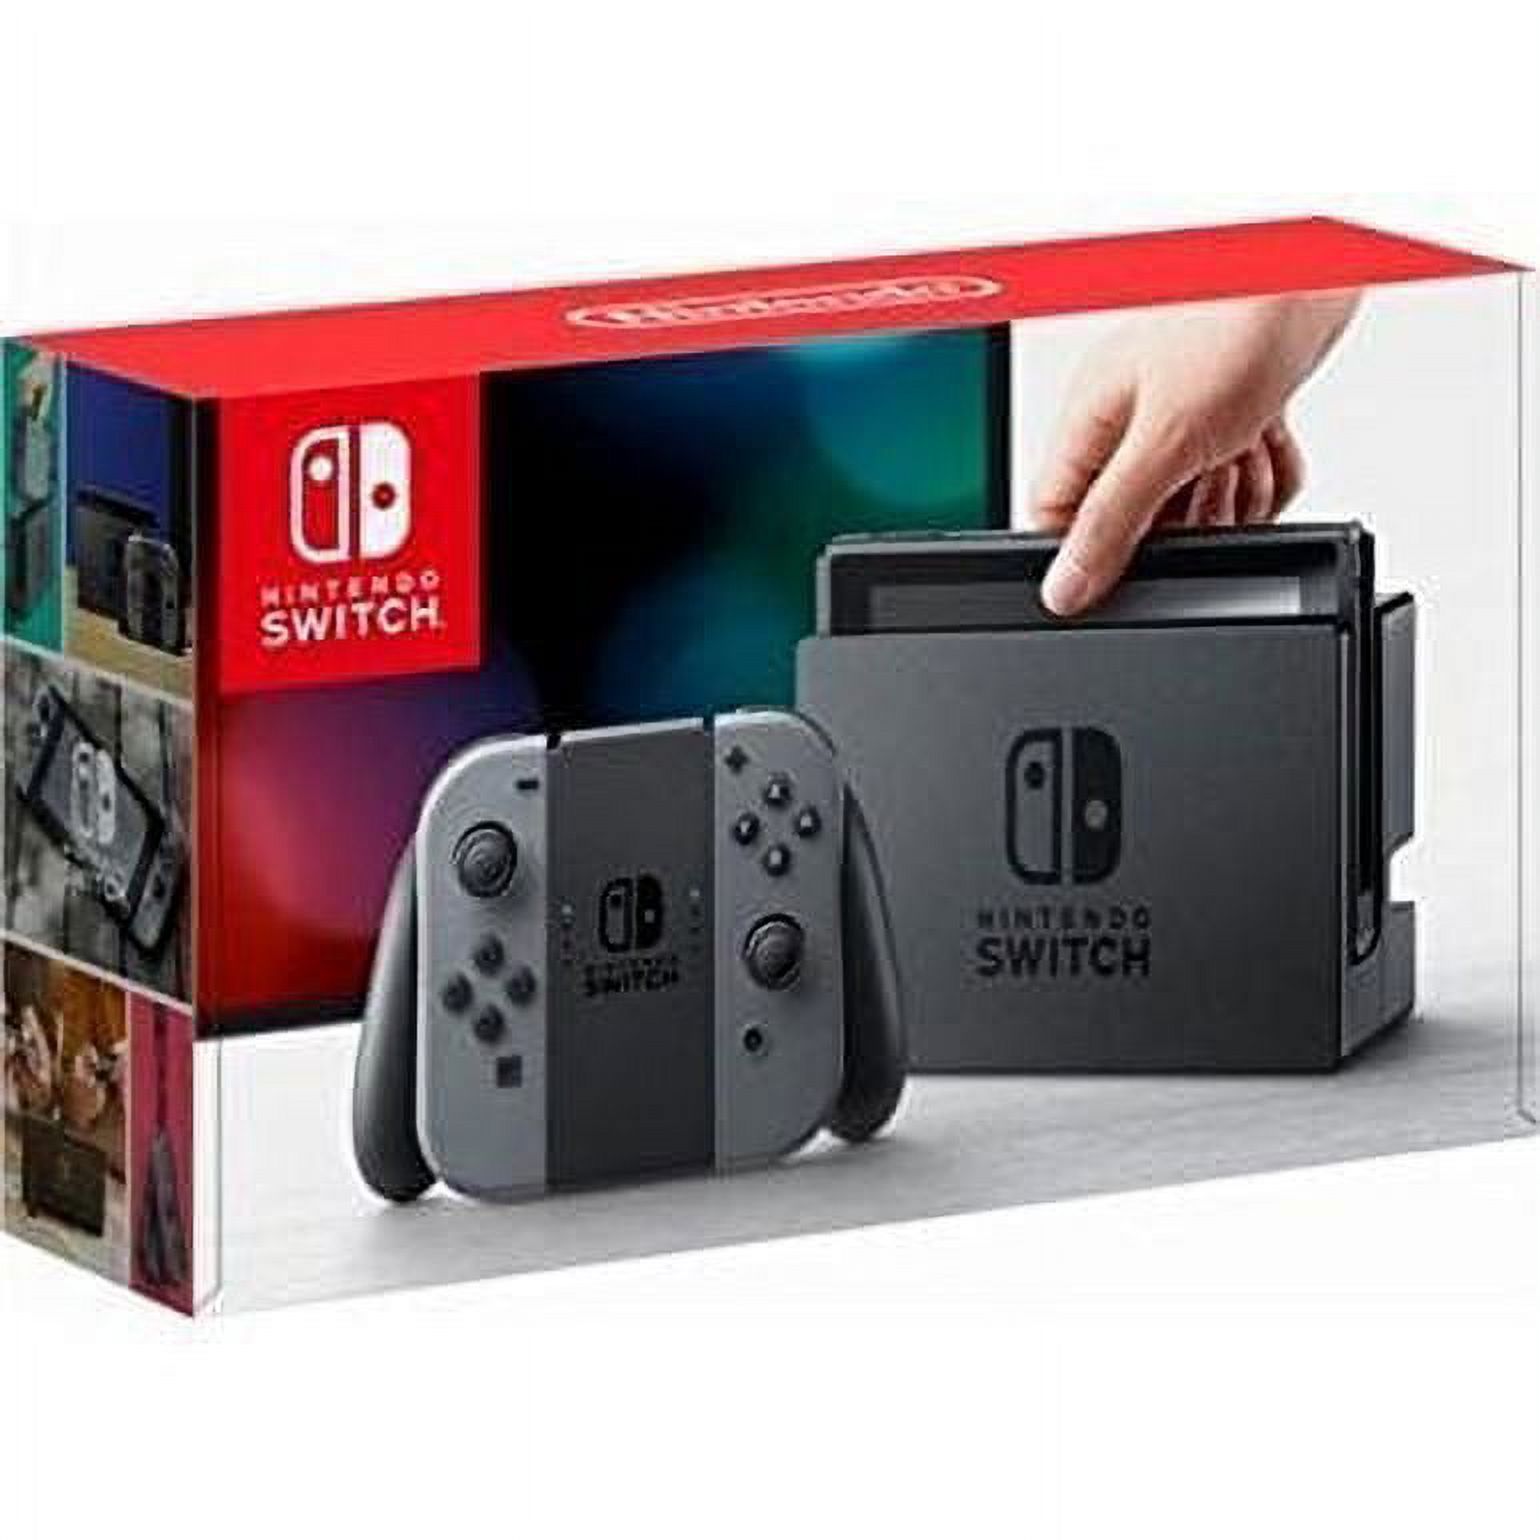 Nintendo Switch Console With Gray Joy-Con (2019) - image 4 of 5